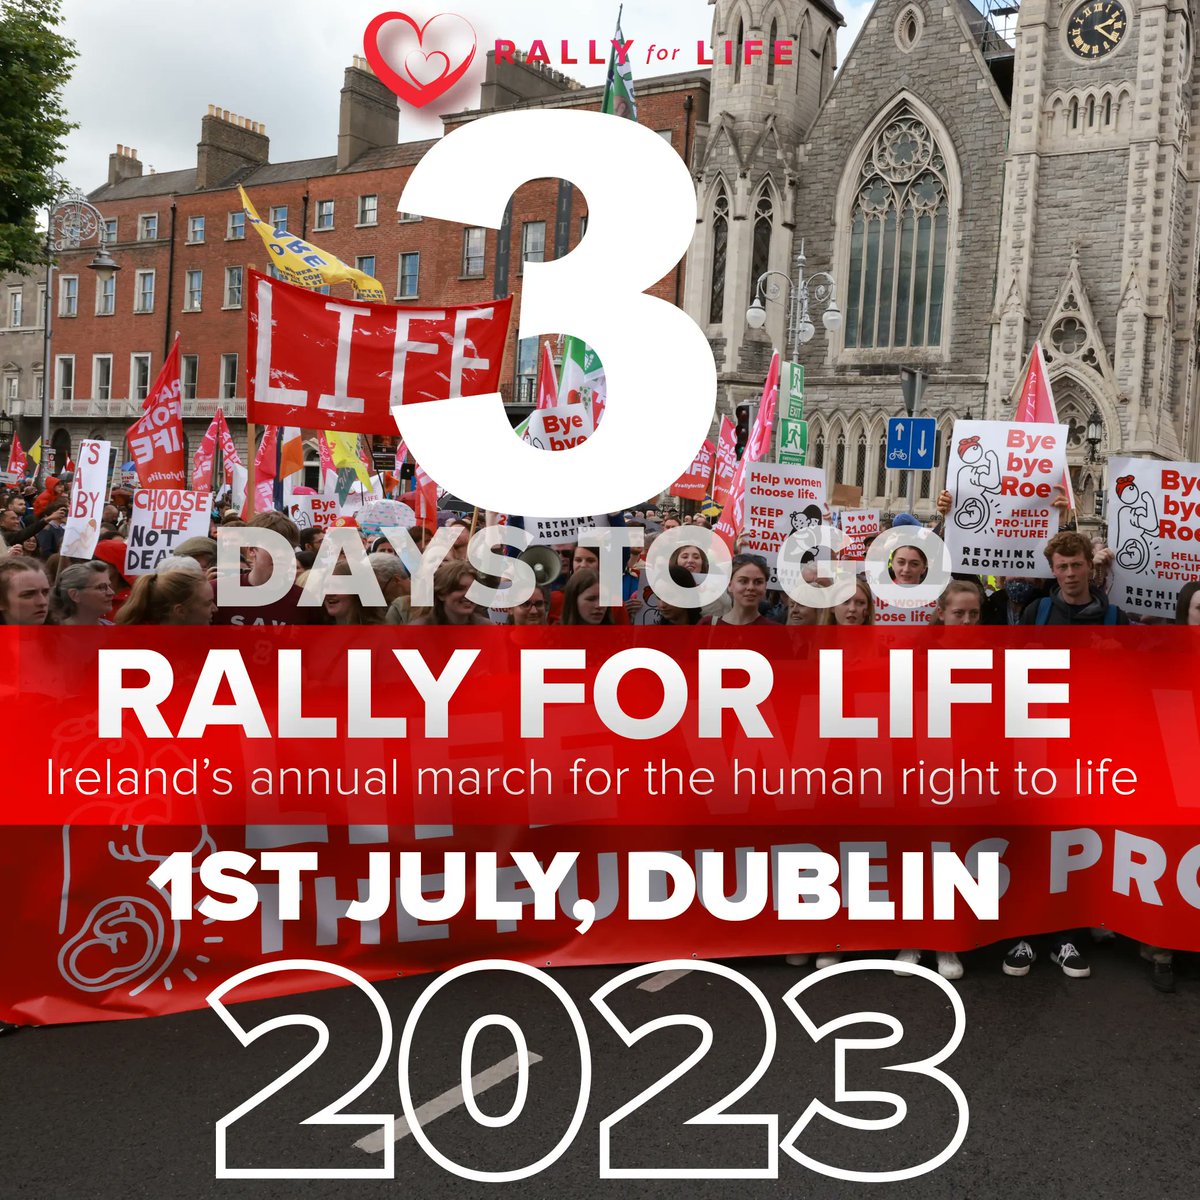 Only 3 DAYS until we Rally for Life! Are you as excited as we are? The Rally will gather at 1pm in Parnell Sq. 

Make sure you check out the RALLYFEST that will be taking place on Saturday before the Rally from 11am in Abbey Church right in Parnell Sq. 

#StopAbortingOurFuture